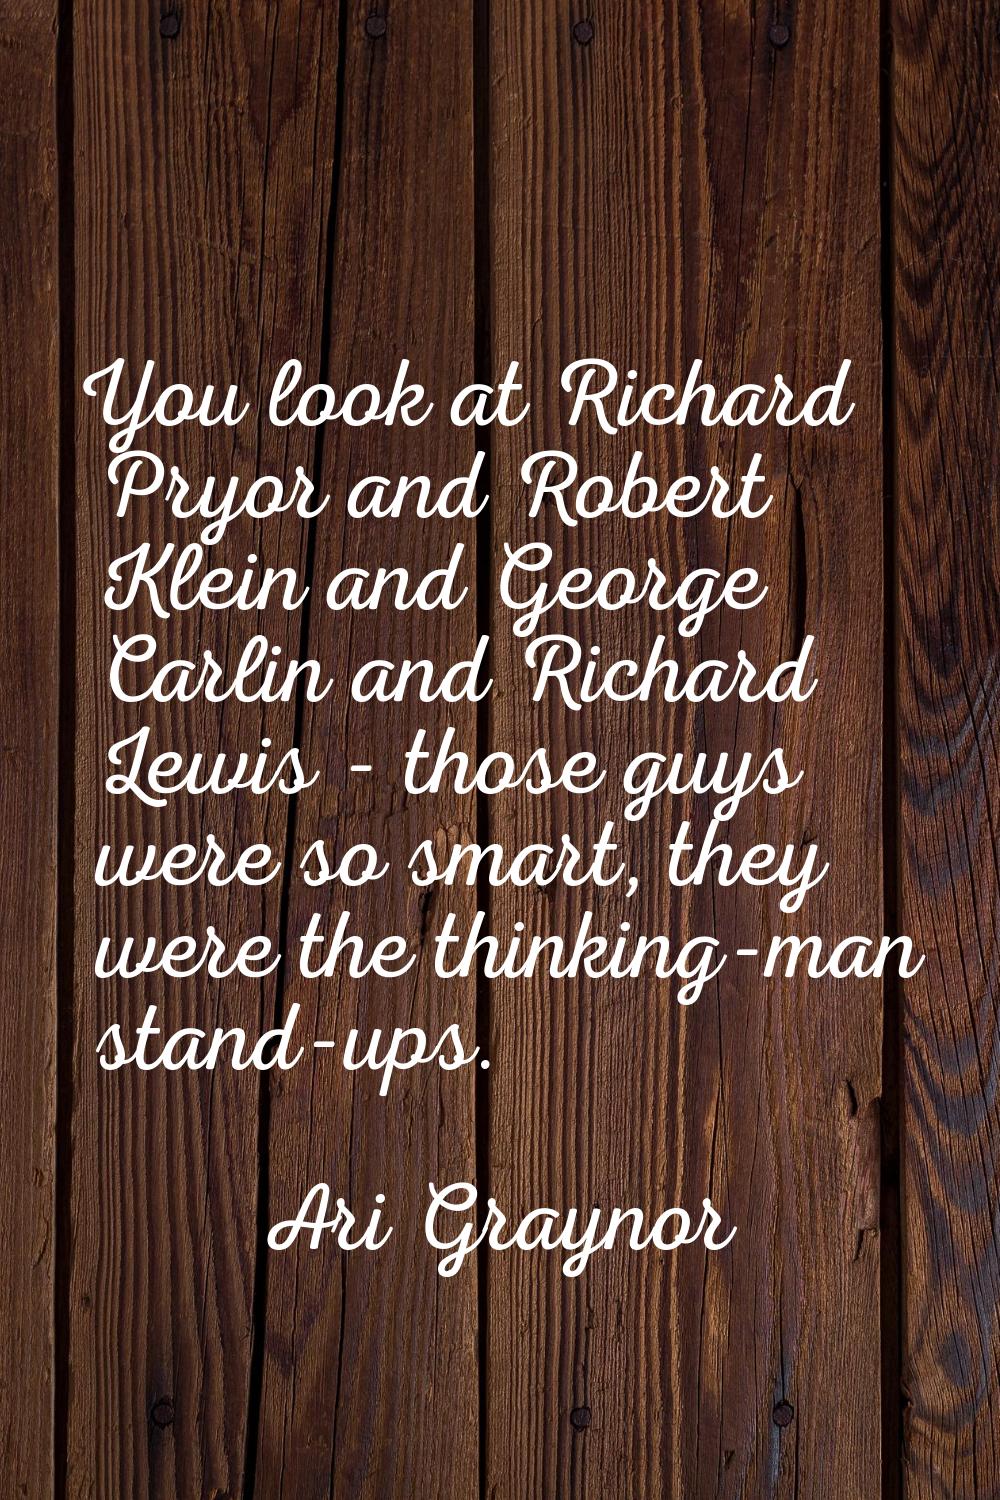 You look at Richard Pryor and Robert Klein and George Carlin and Richard Lewis - those guys were so